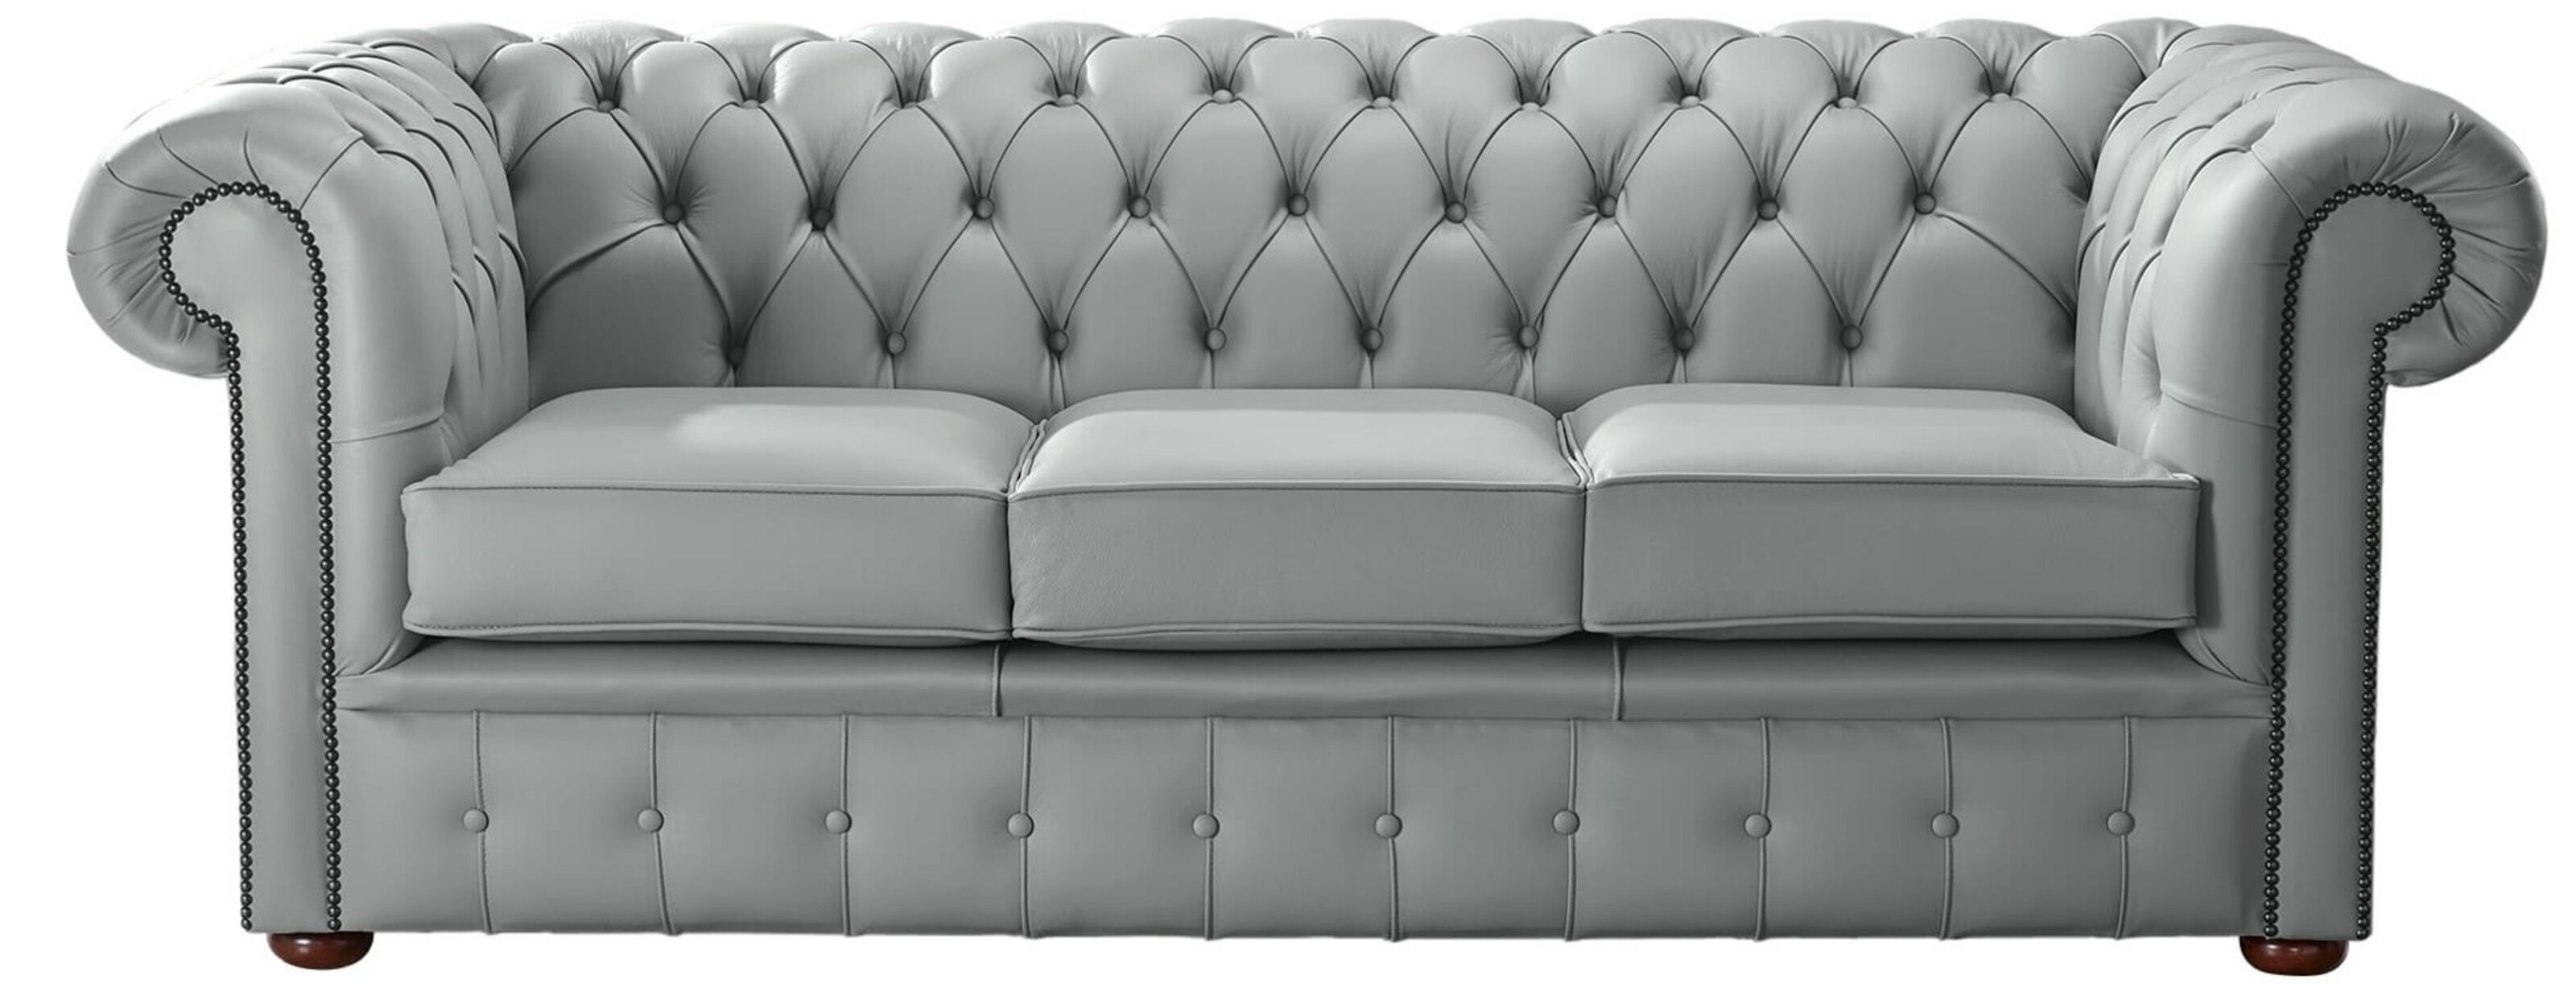 Elegant Neutrals: Exploring Grey Options for Chesterfield Sofas  %Post Title